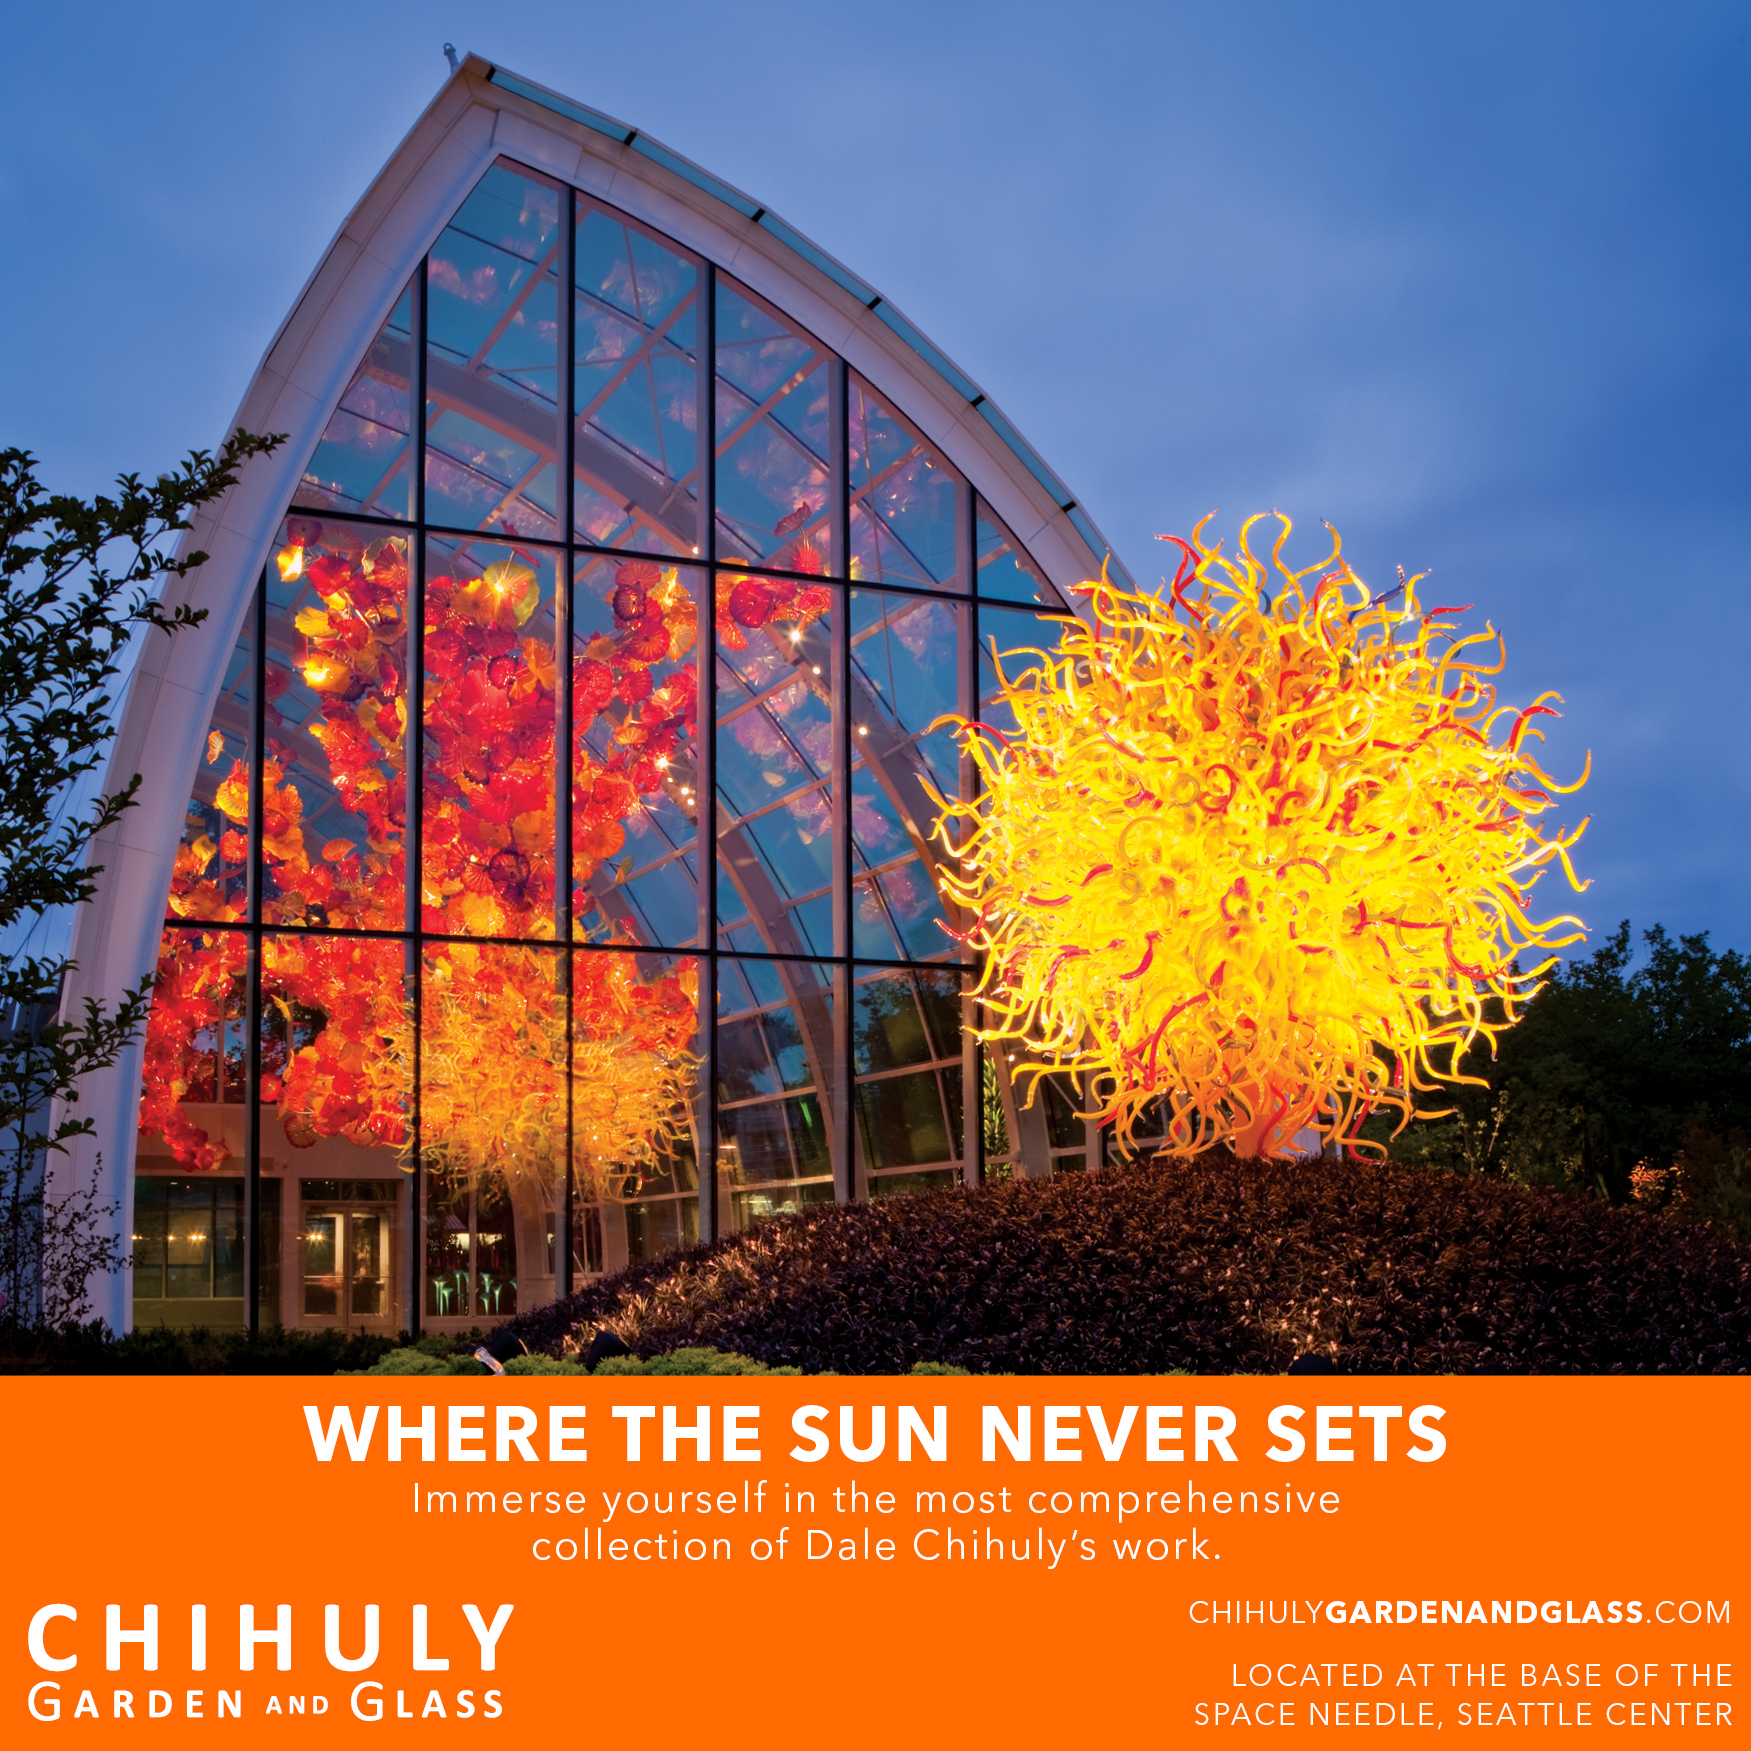 ENTER TO WIN  Chihuly Garden & Glass Seattle Center  Chihuly Garden and Glass, located at